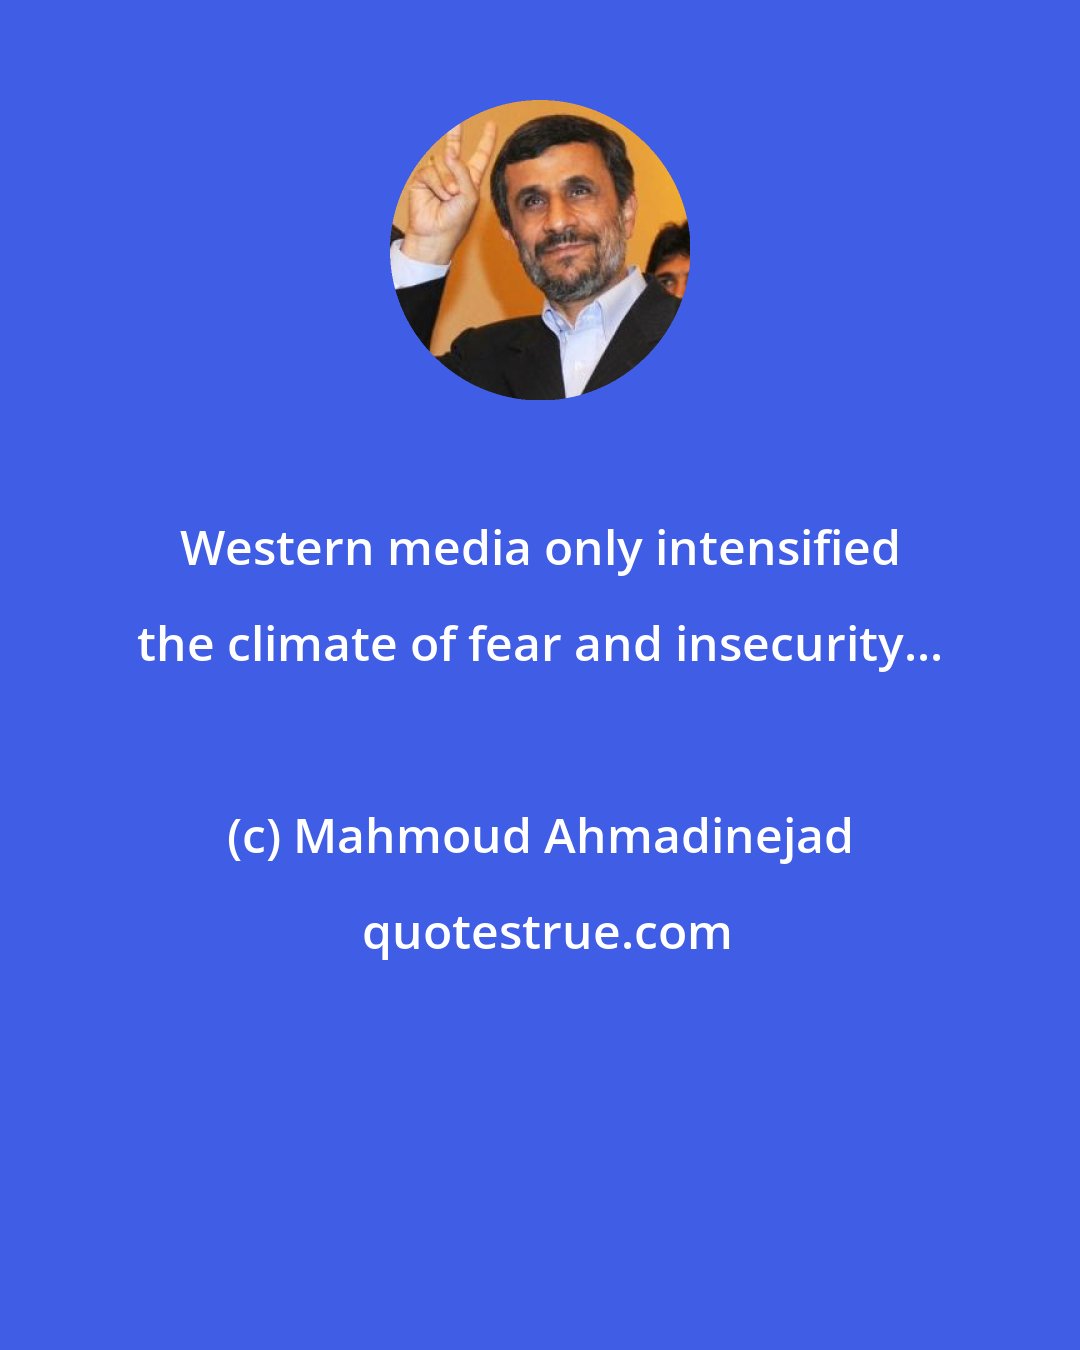 Mahmoud Ahmadinejad: Western media only intensified the climate of fear and insecurity...